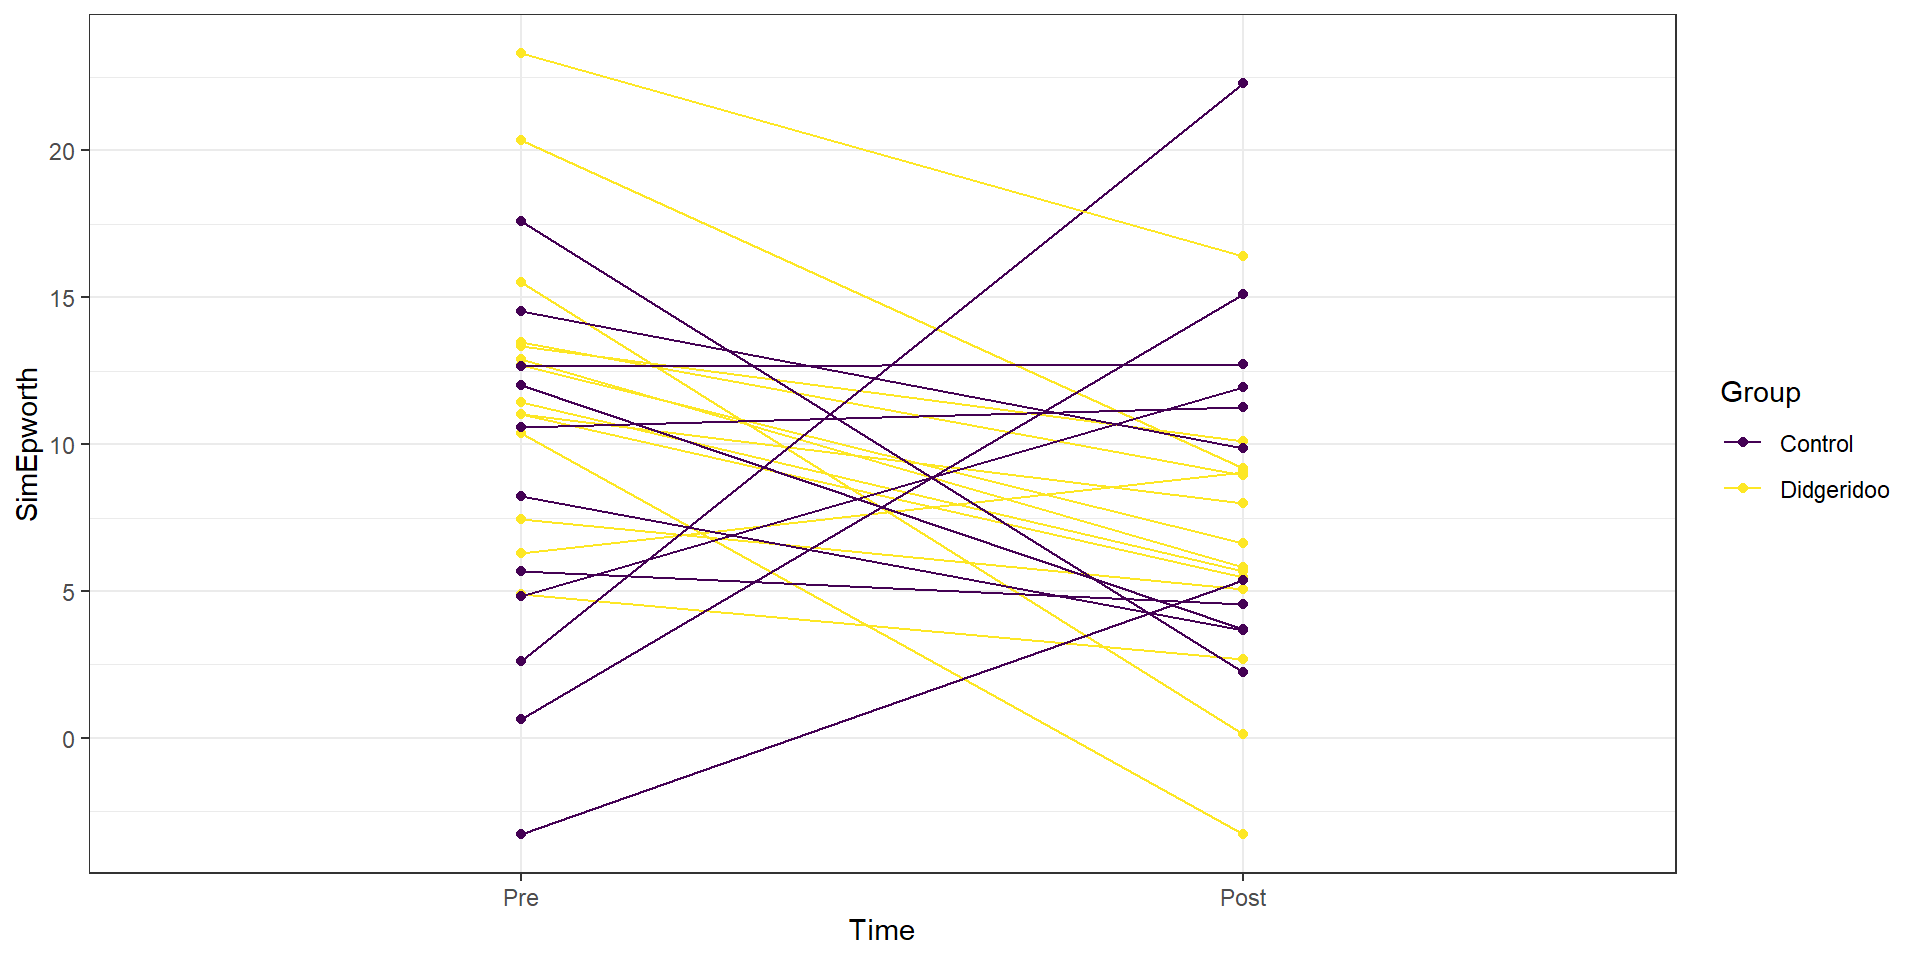 Plot of simulated data from the Two-Way ANOVA model that does not assume observations are on repeated measures on subjects to compare to the real data set. Even though the treatment levels seem to decrease on average, there is a much less clear relationship between the starting and ending values in the individuals.